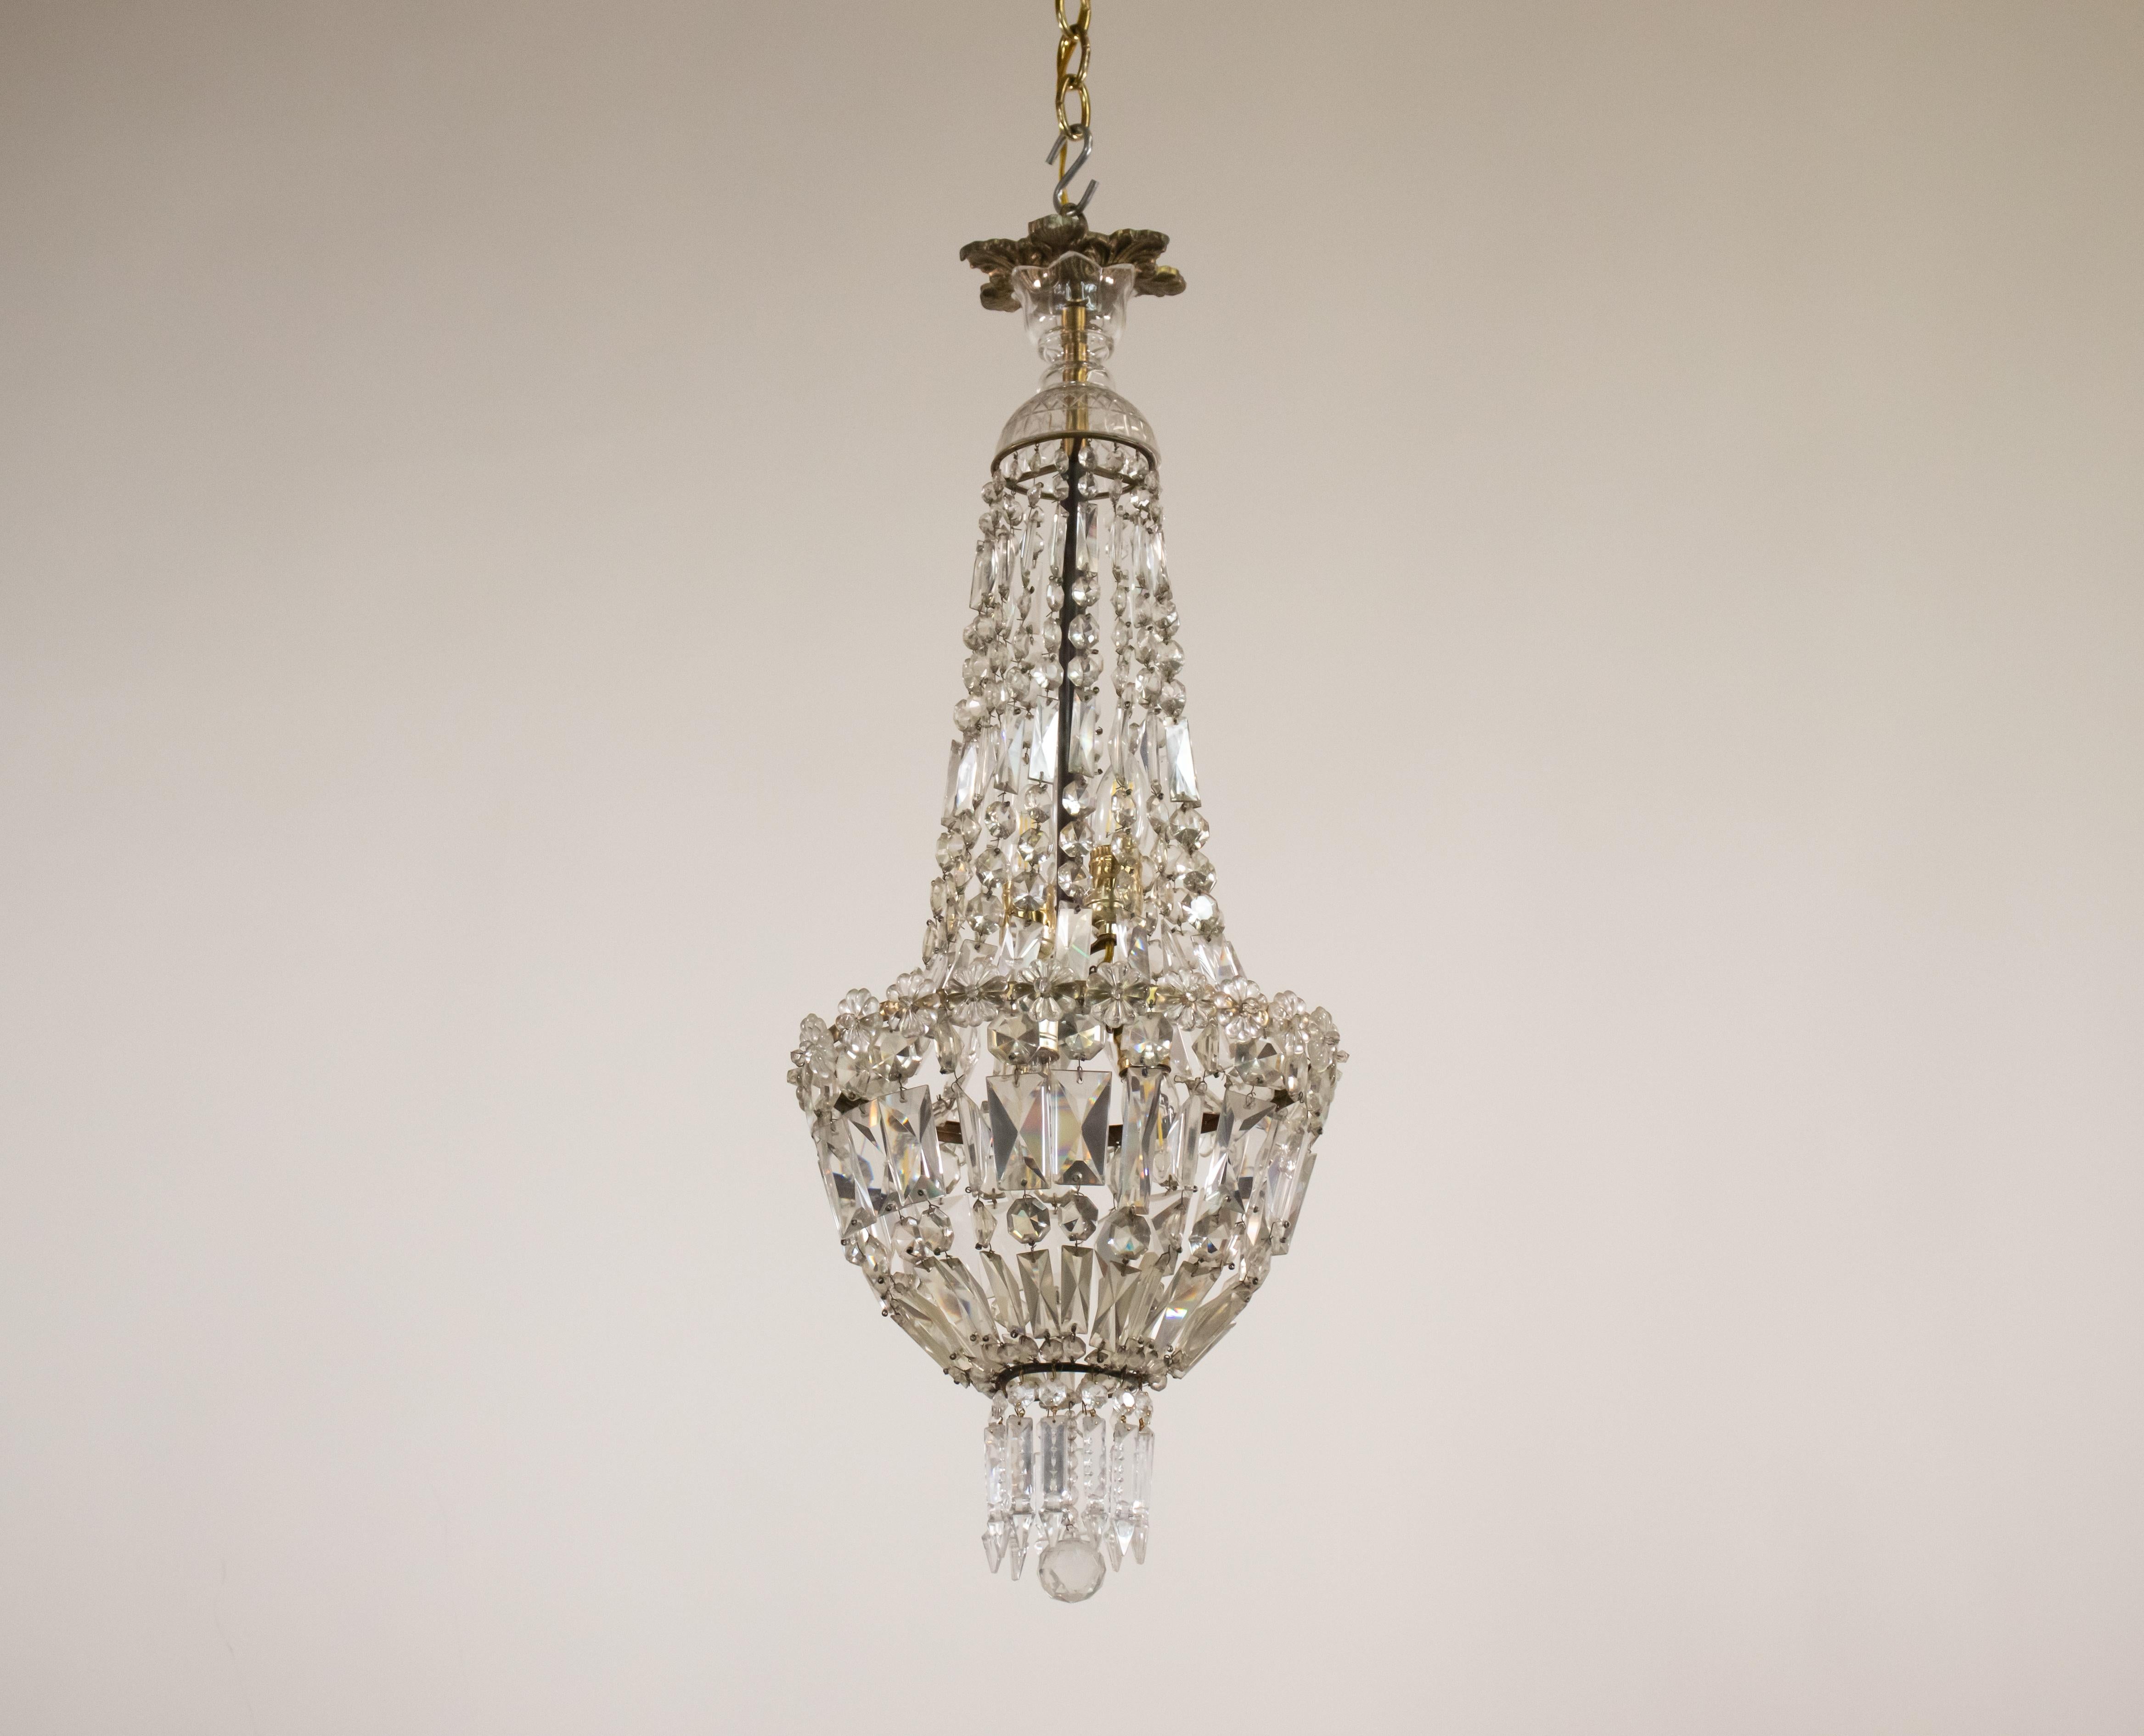 This chandelier features a bronze crown adorned with an acanthus leaf design at its peak. Its structure is beautifully composed of a series of shimmering crystal beads and baguettes that come together to create a crystal bowl, elegantly edged with a